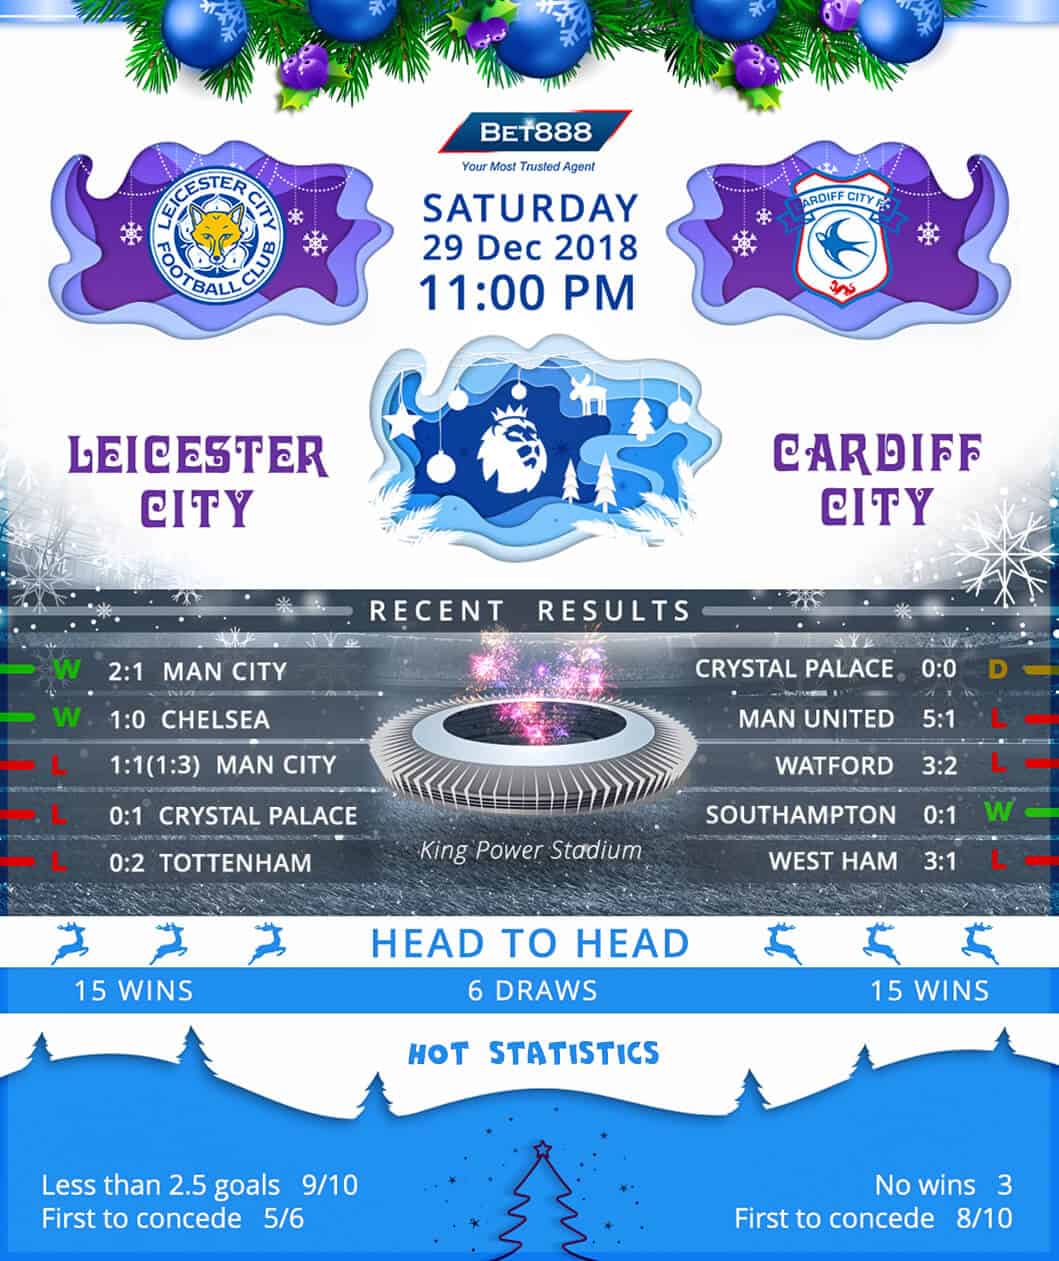 Leicester City vs Cardiff City 29/12/18